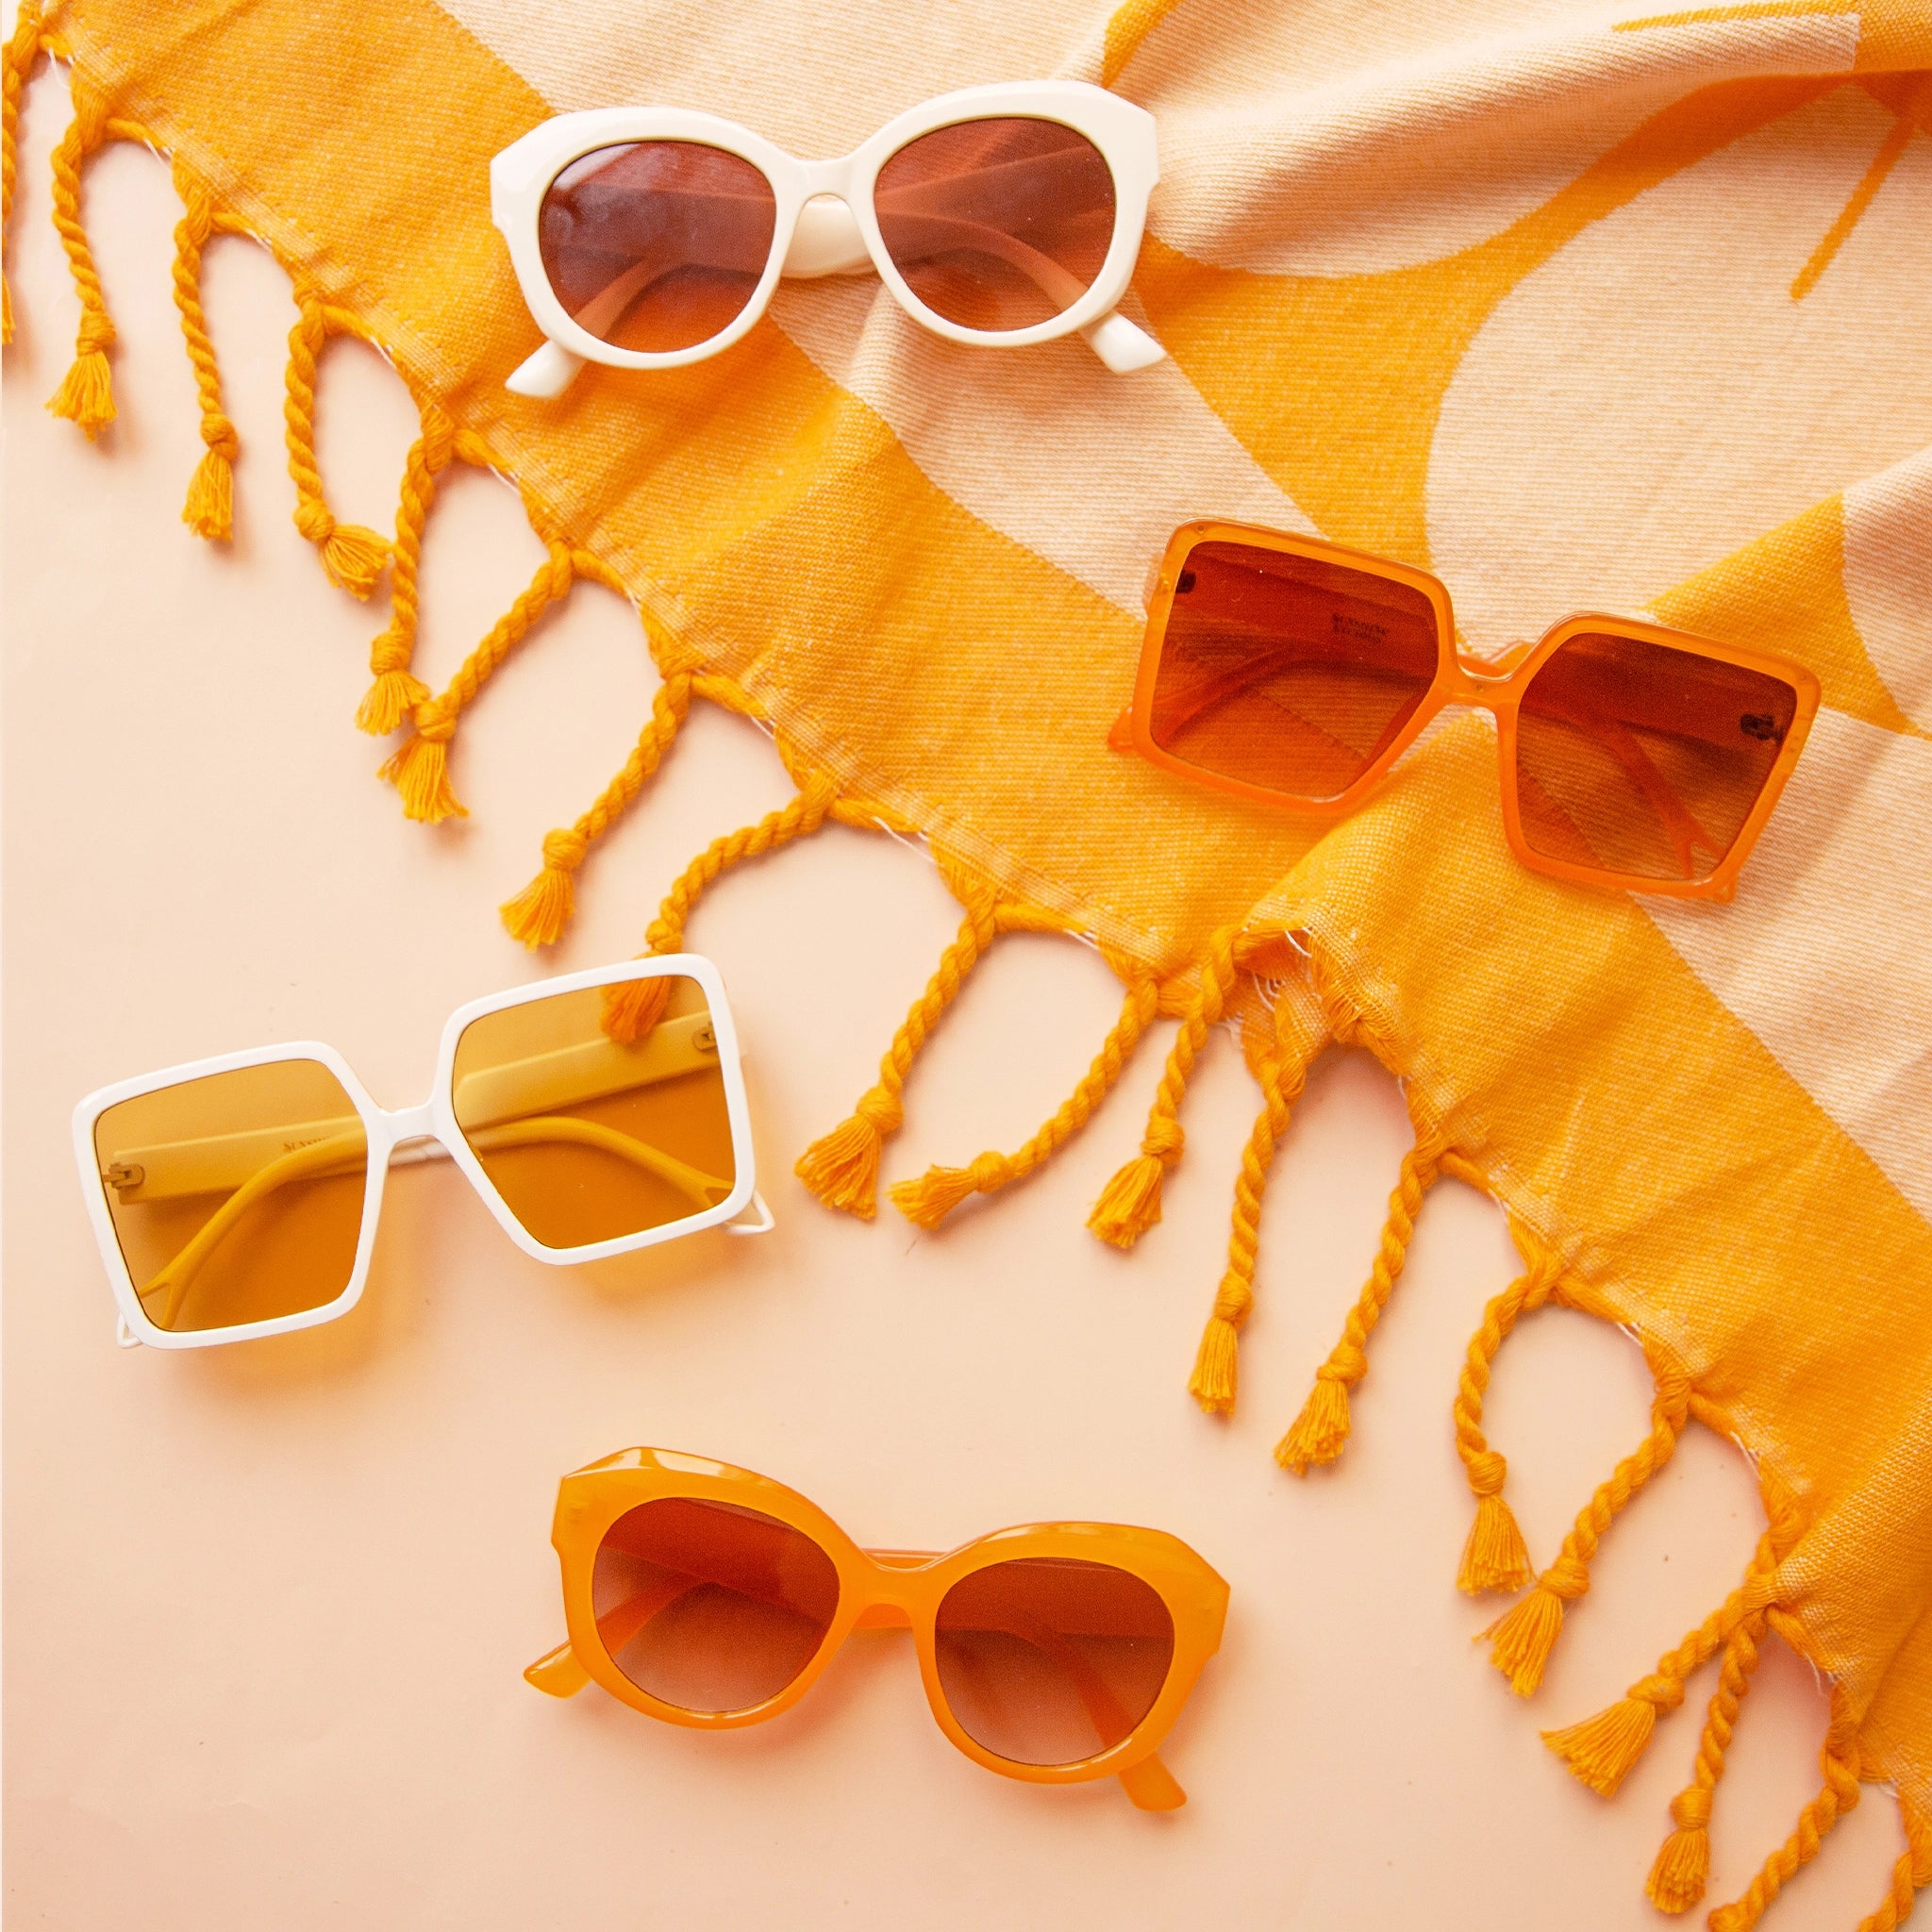 four pairs of sunglasses in various shapes and colors lie flat on a yellow beach towel